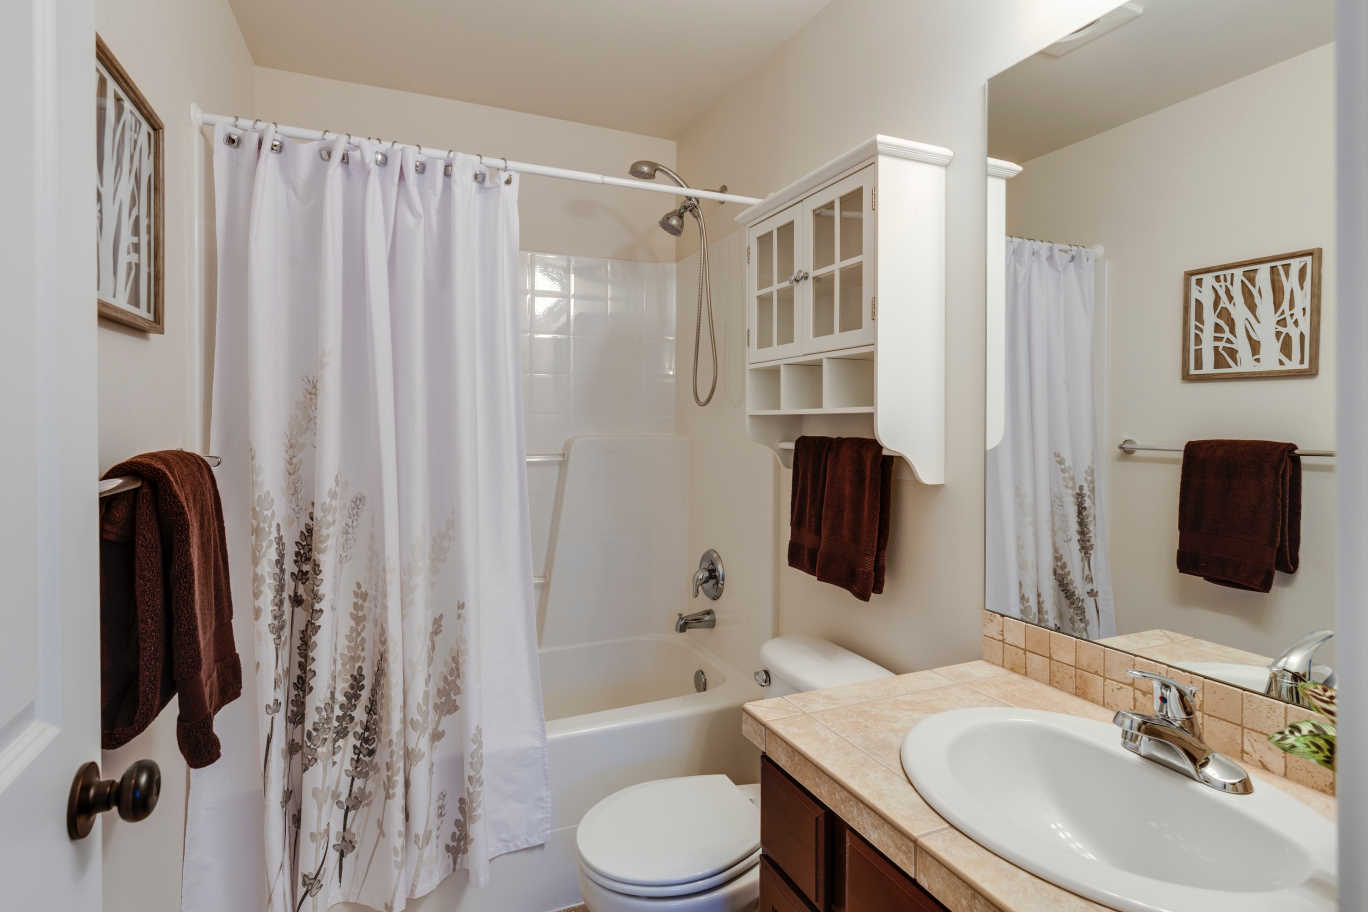 Image of a finished bathroom.